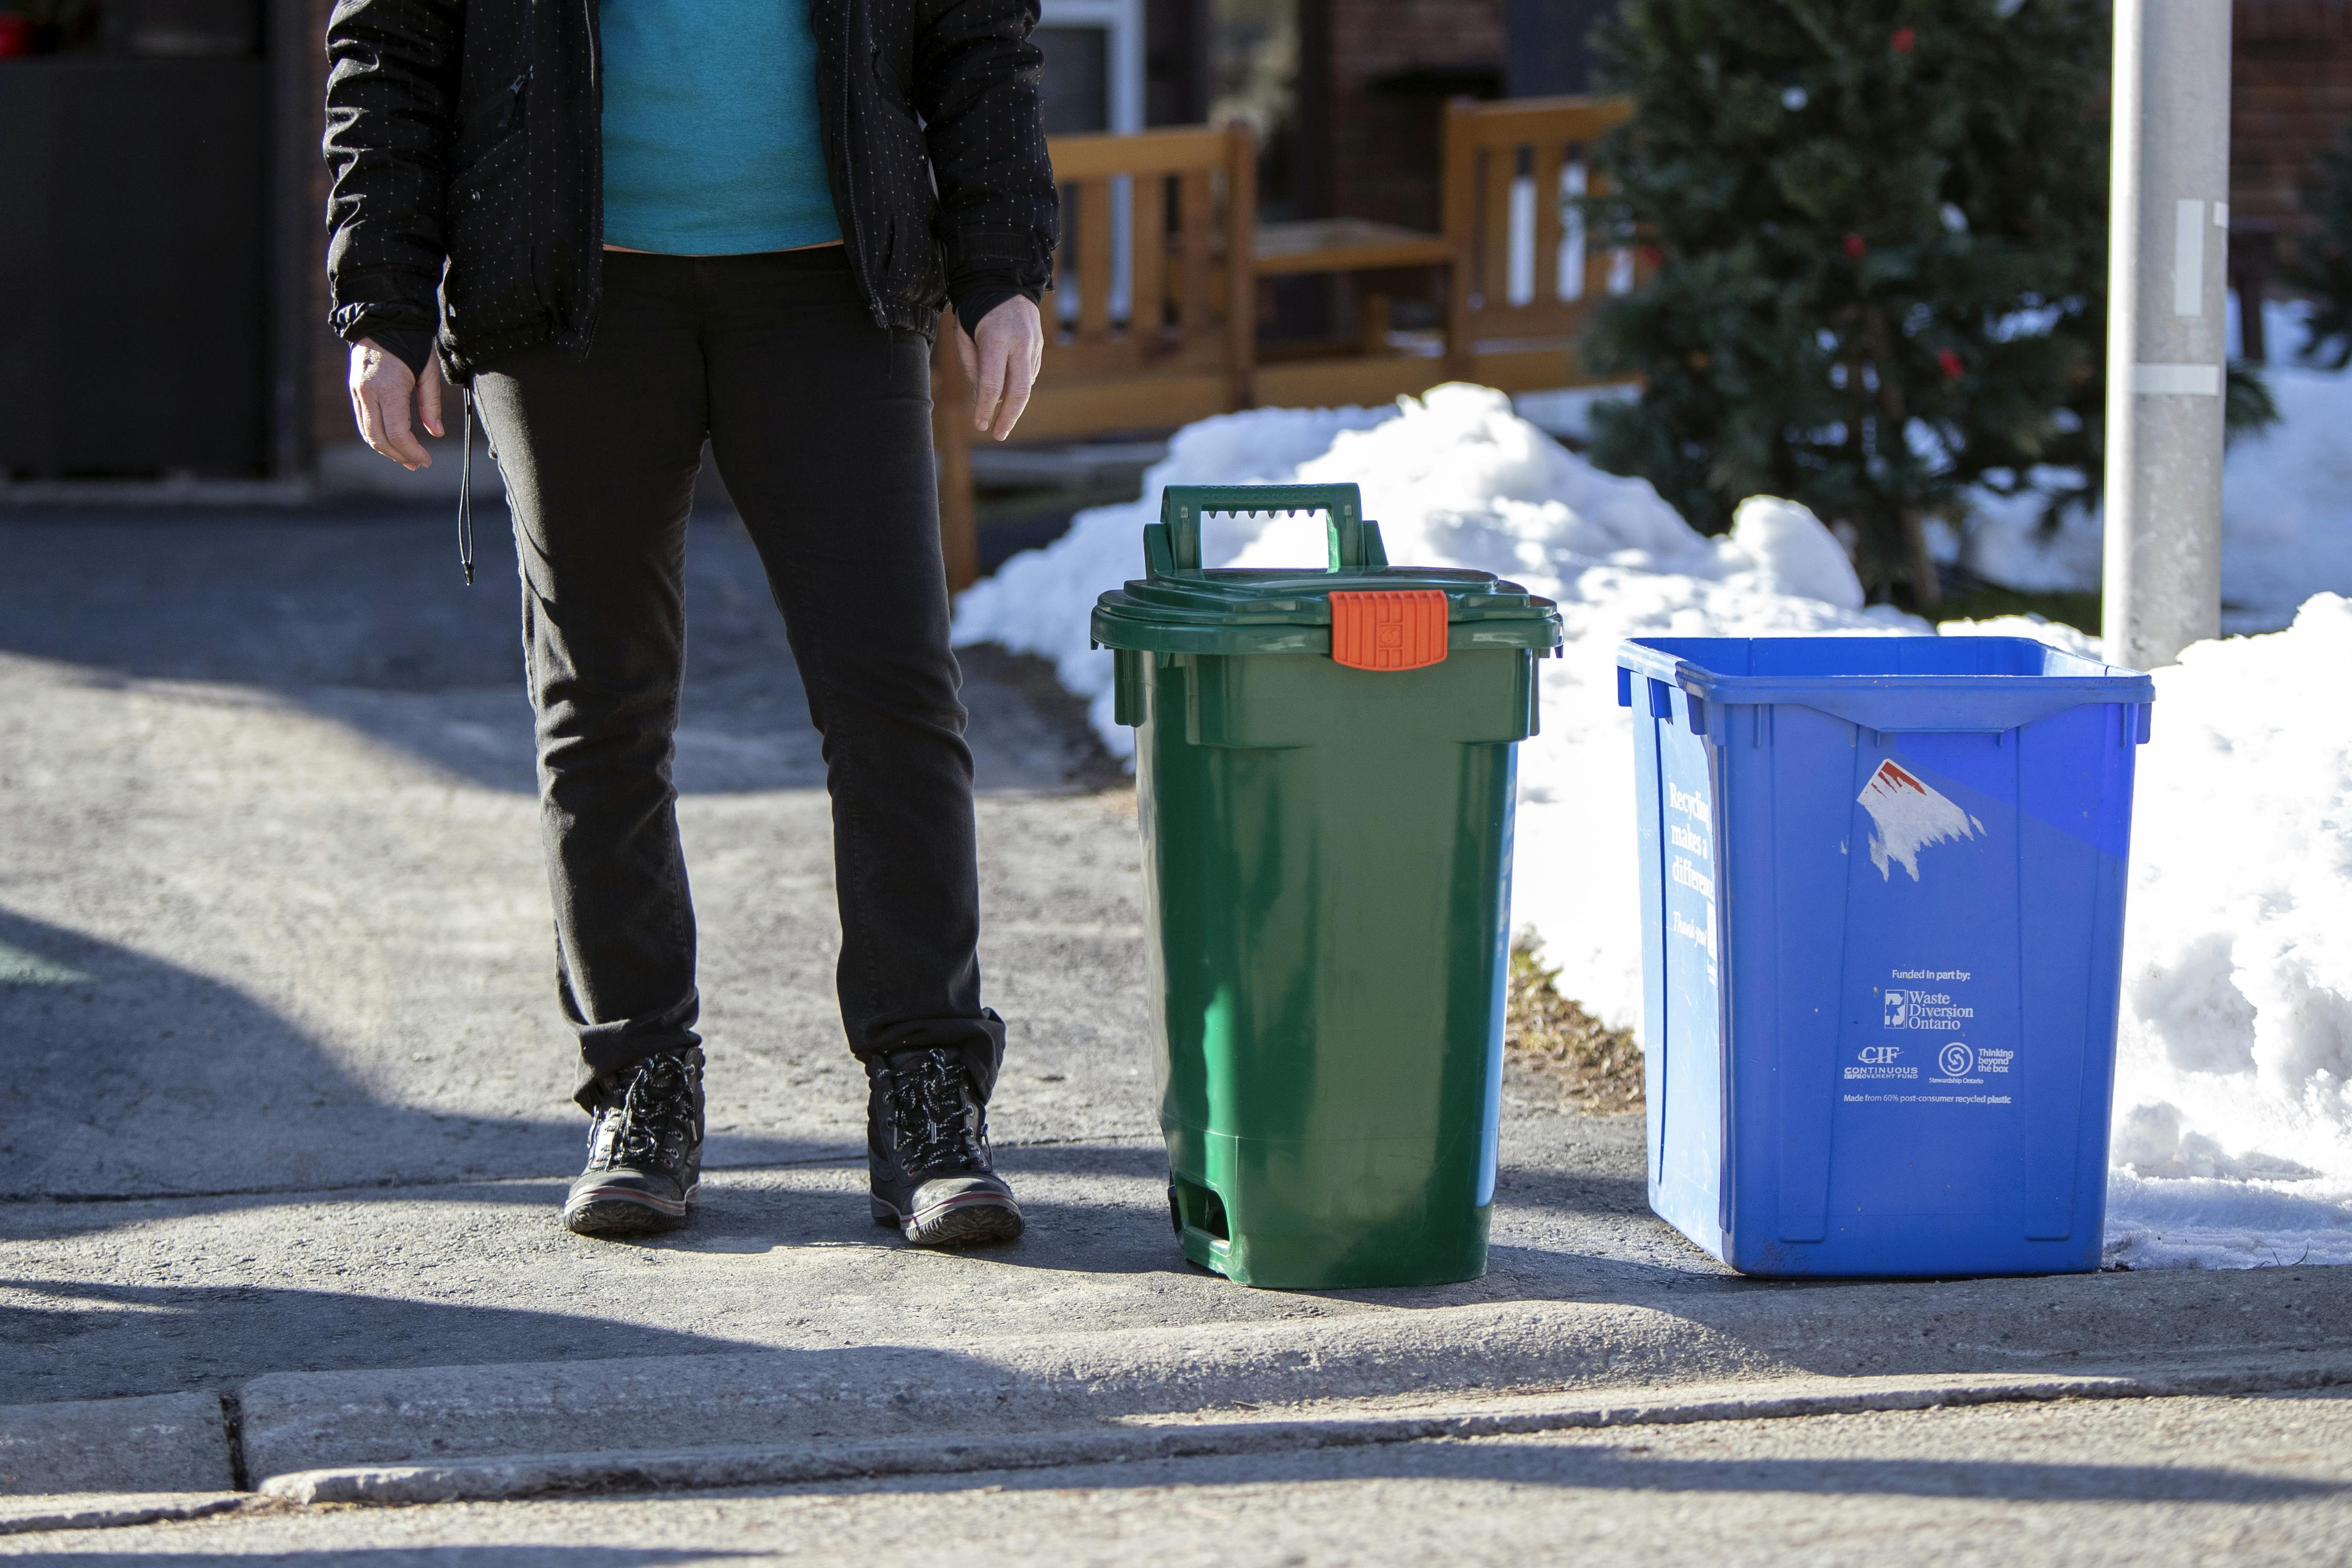 A small size Green Bin placed at the curb